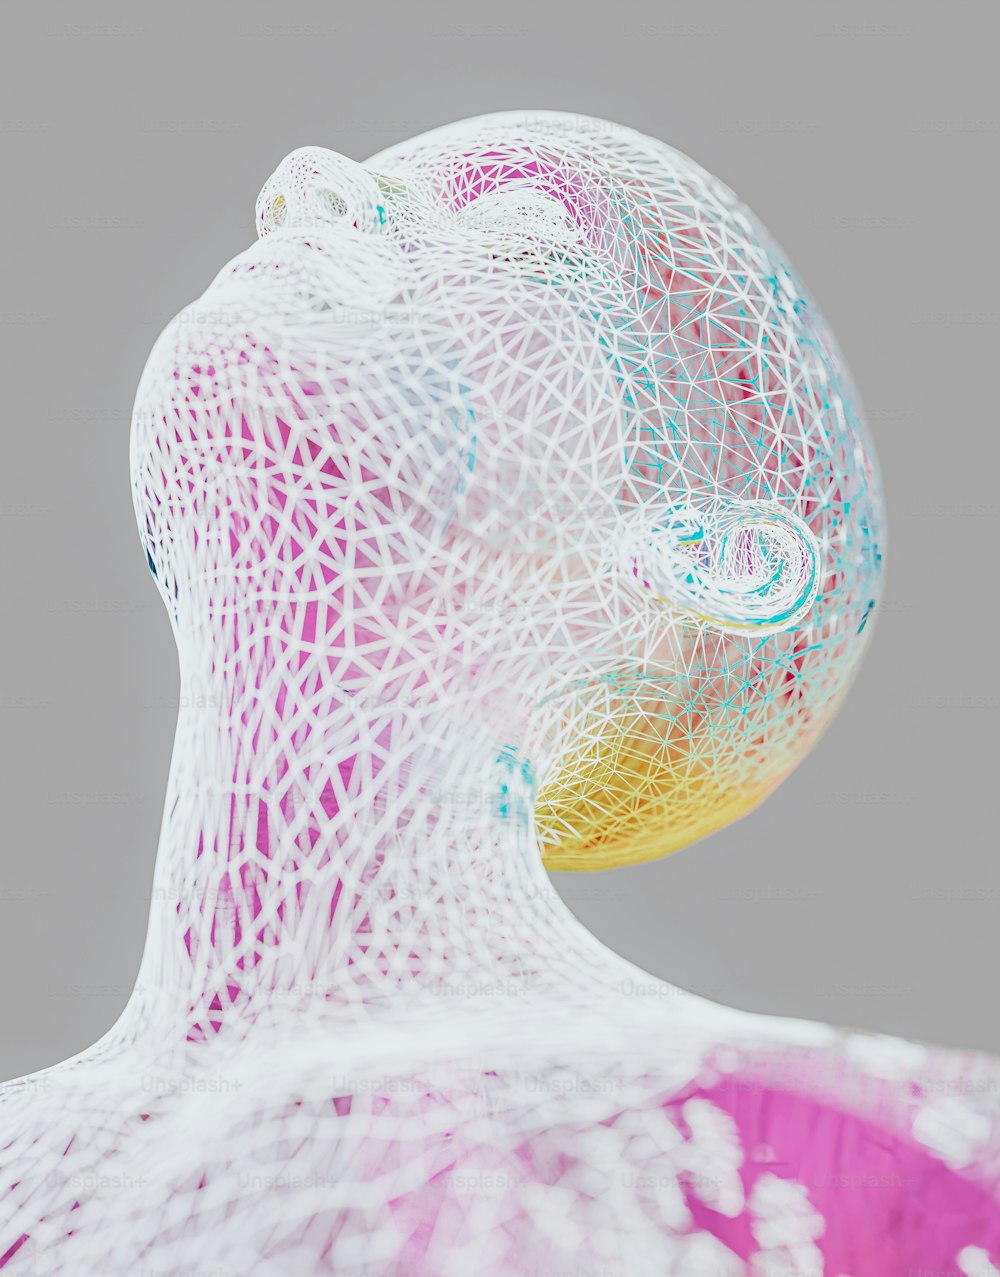 a sculpture of a woman's head made out of mesh